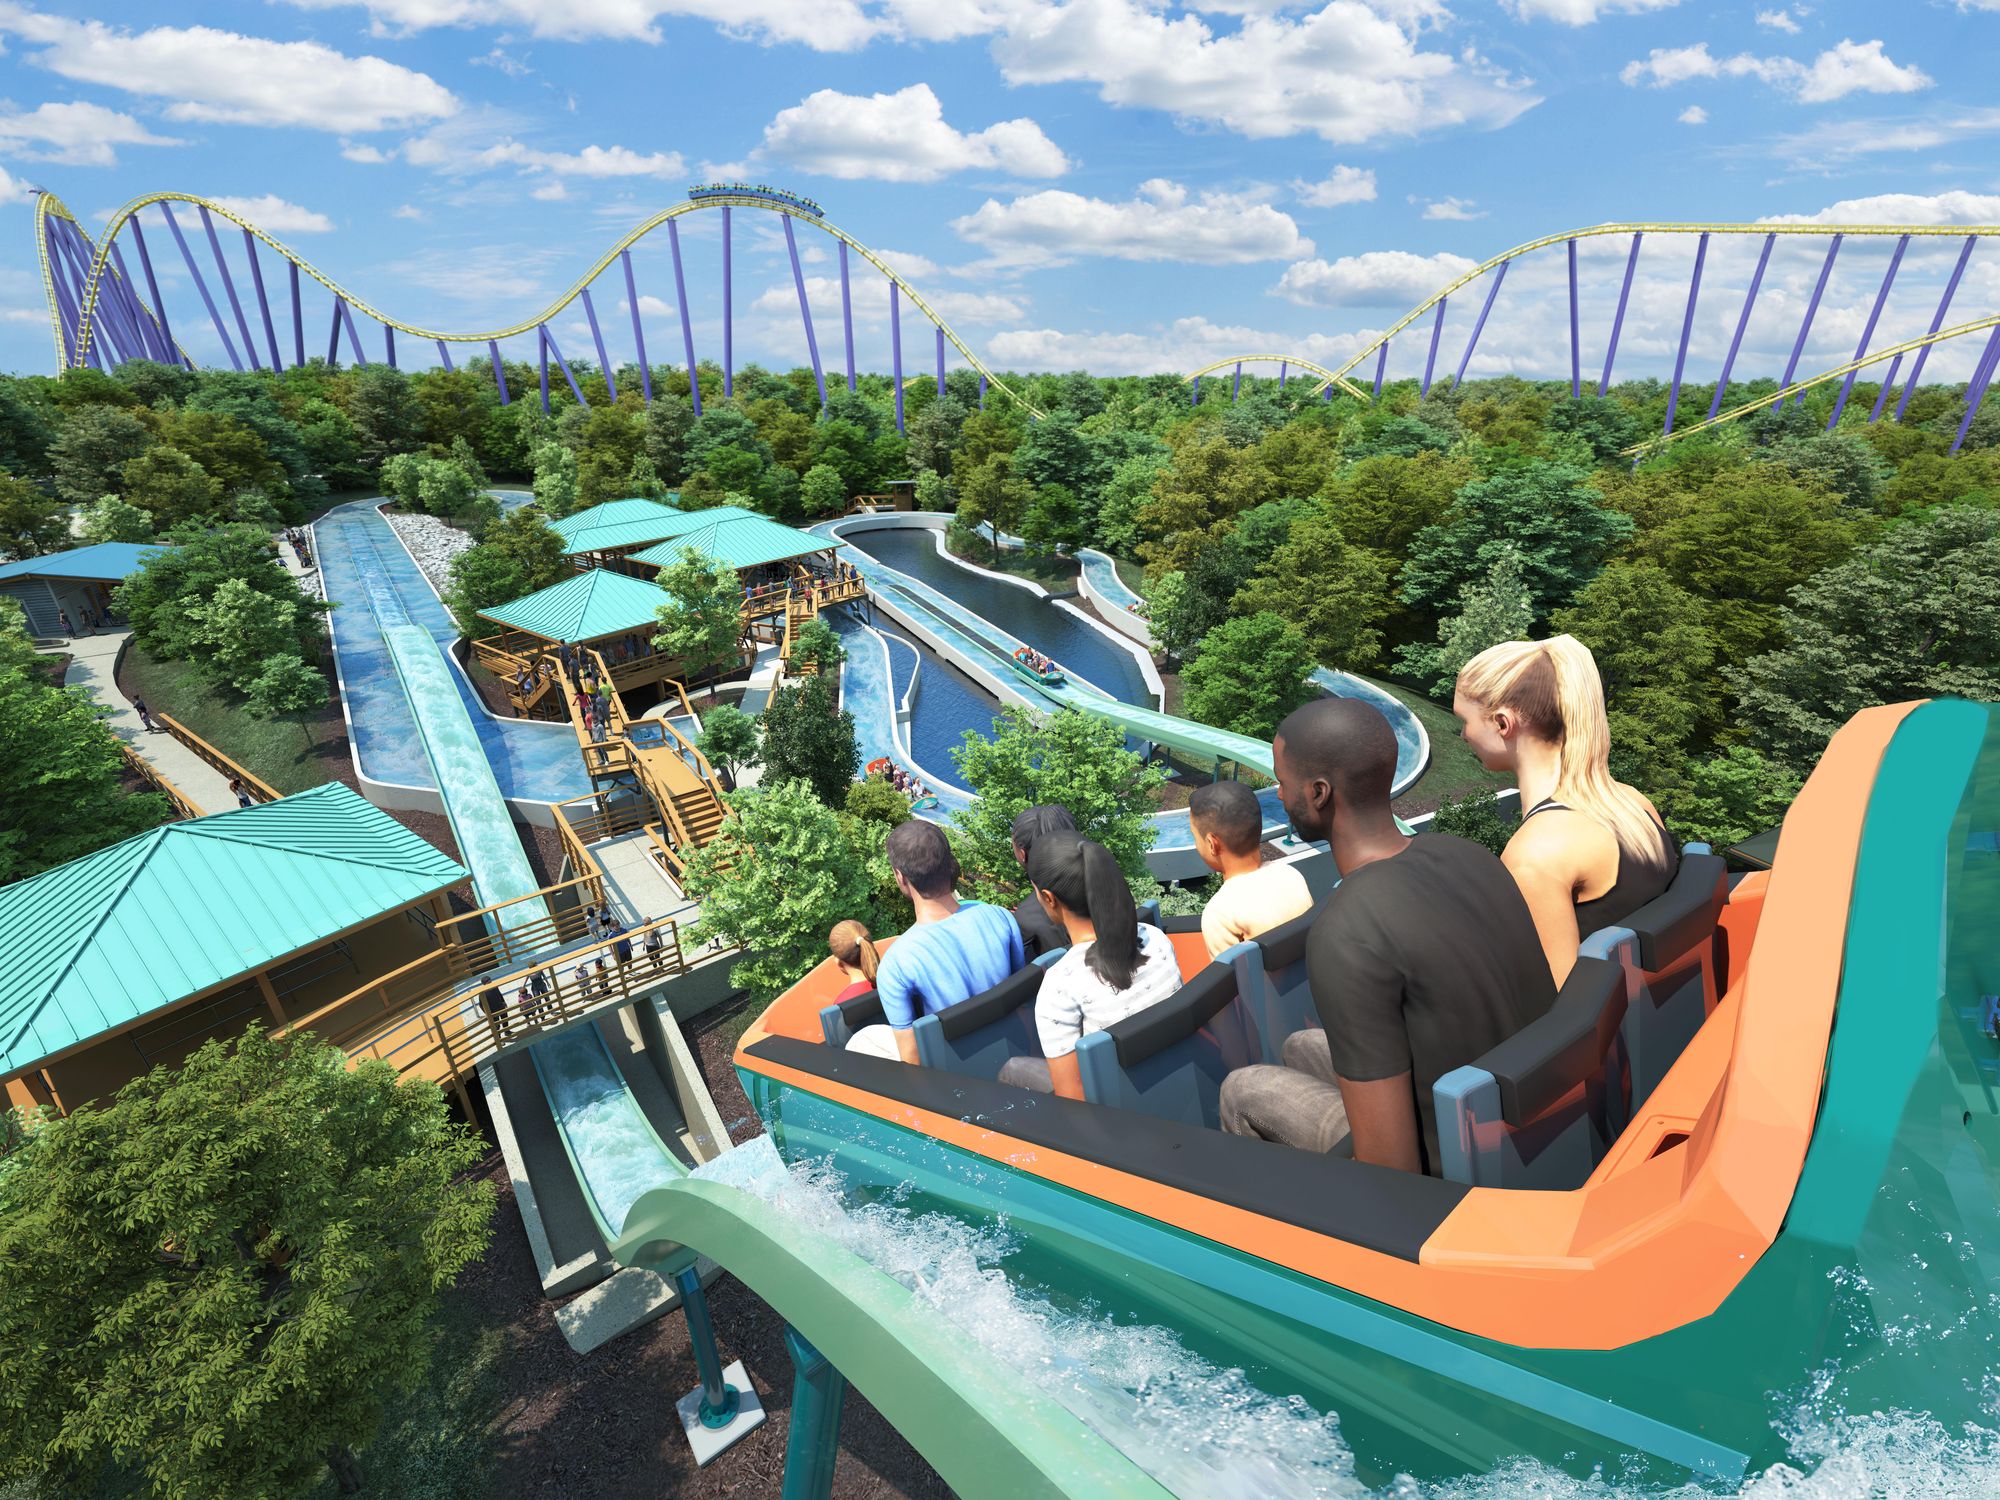 World's first water coaster of its kind catapults into Texas amusement park